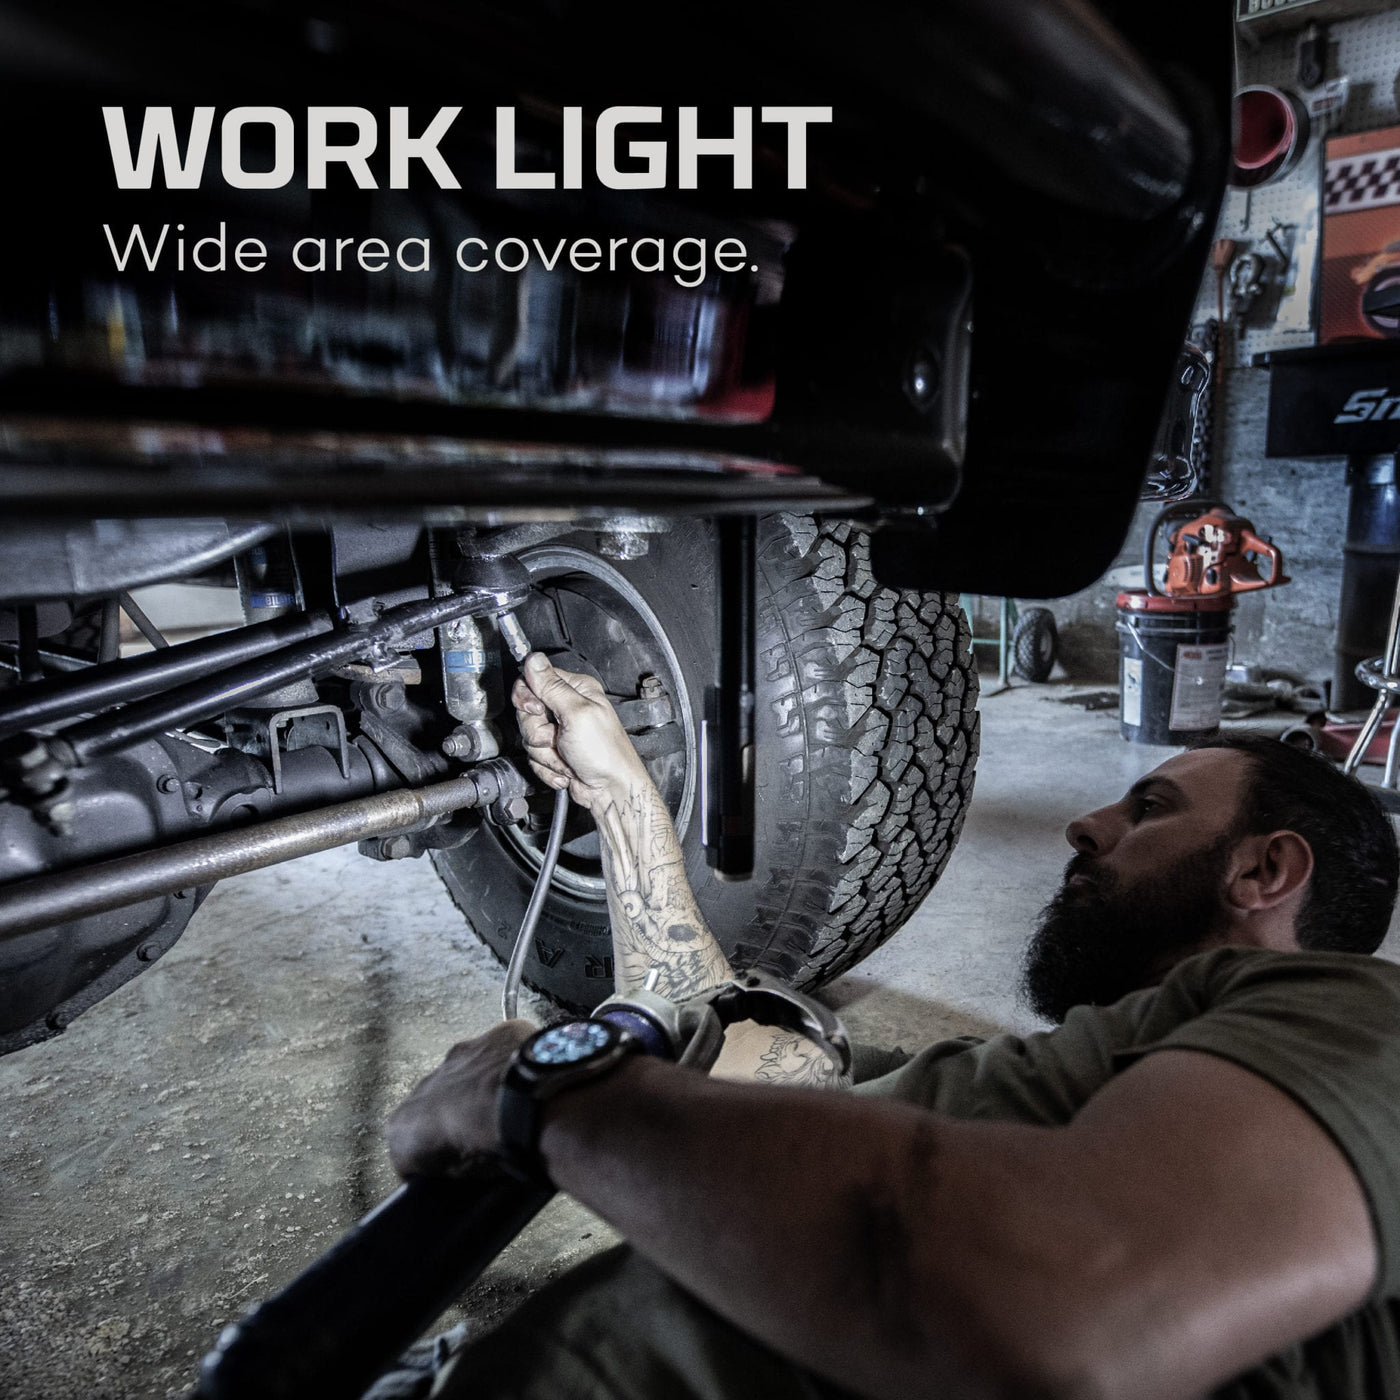 At Nebo Tools, we continually innovate so that we can offer the highest quality LED lighting products at the best price. The Franklin™ Dual by NEBO is a powerful rechargeable handheld flashlight and work light with 7 light modes. The DUAL features COB technology in the work light and the powerful LED chip in the flashlight can shine up to 75 meters away. The included battery allows for up to 40 hours of operation in between charges.